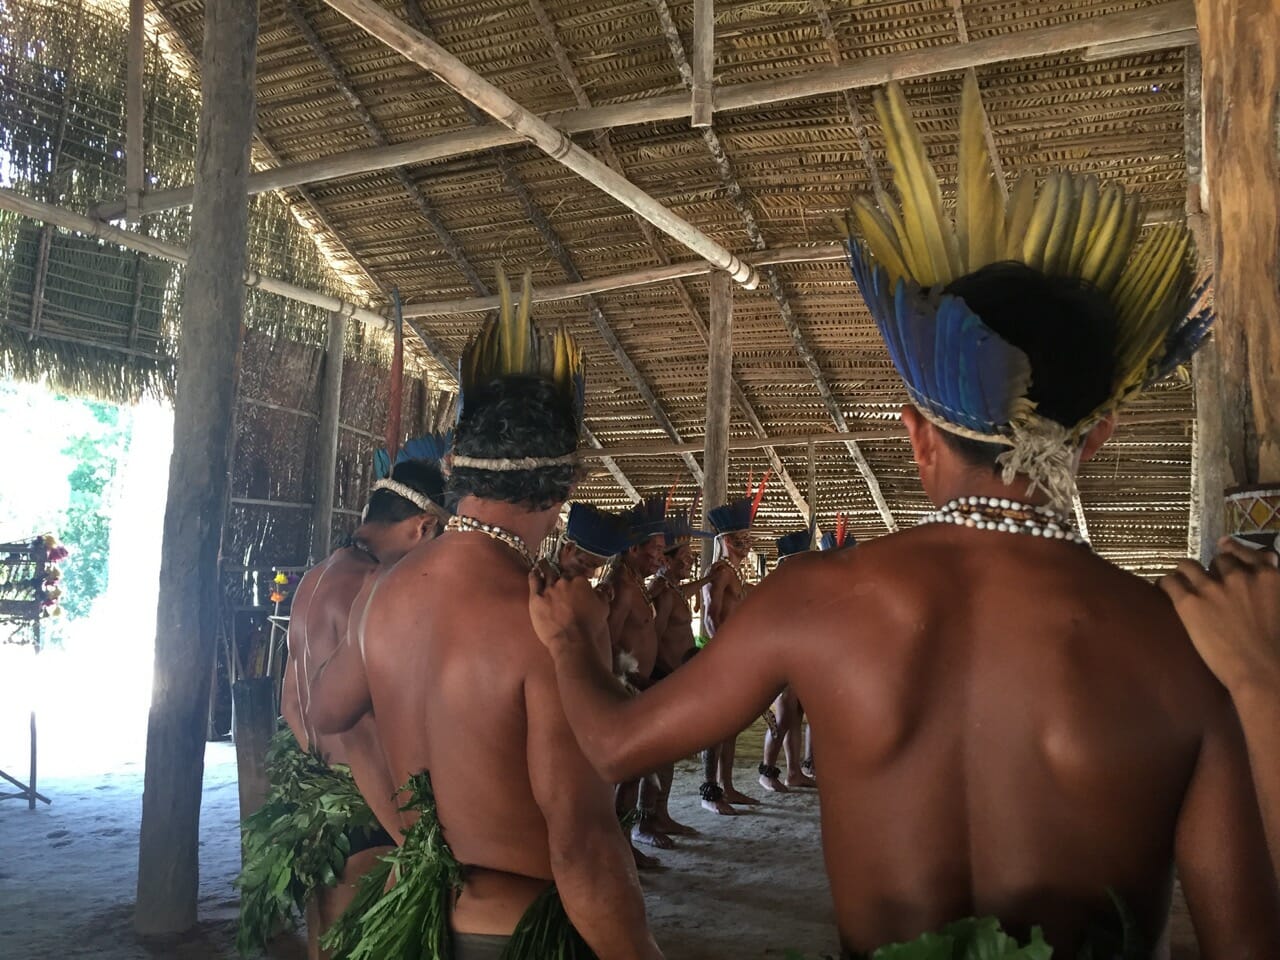 Visiting an Indigenous Tribe in the Amazon, Brazil 2